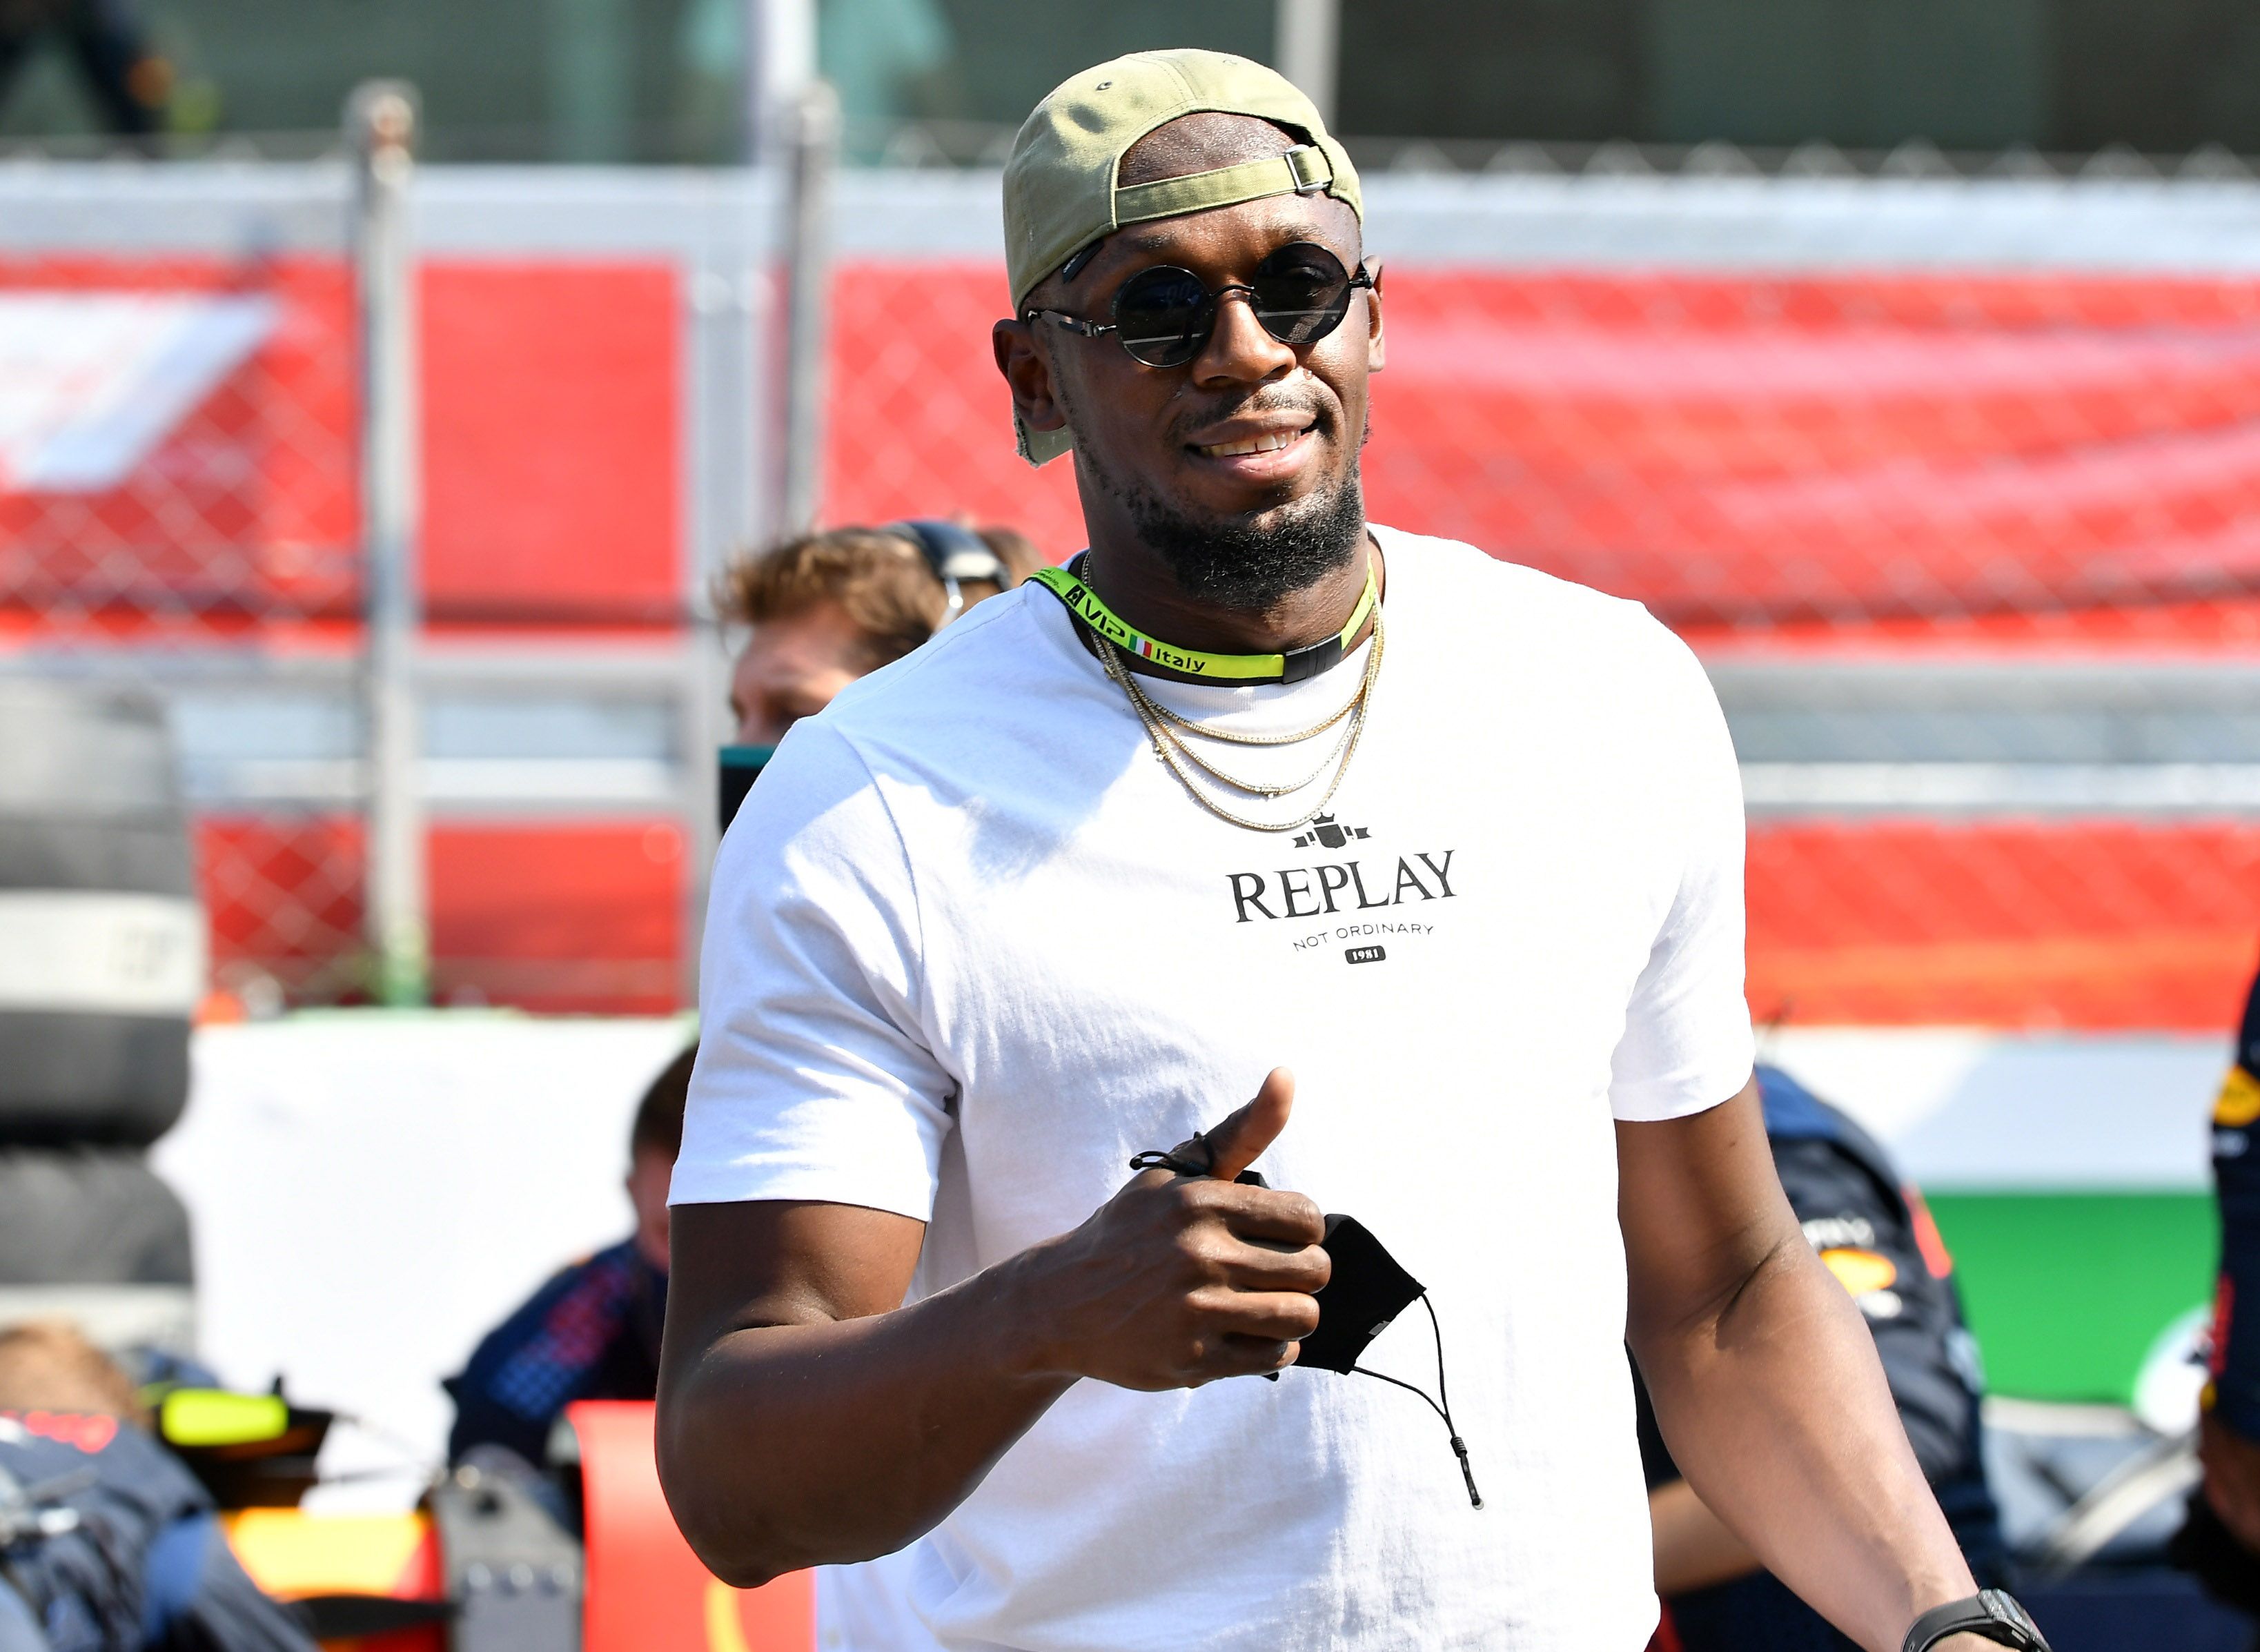 Bolt appears at the F1.